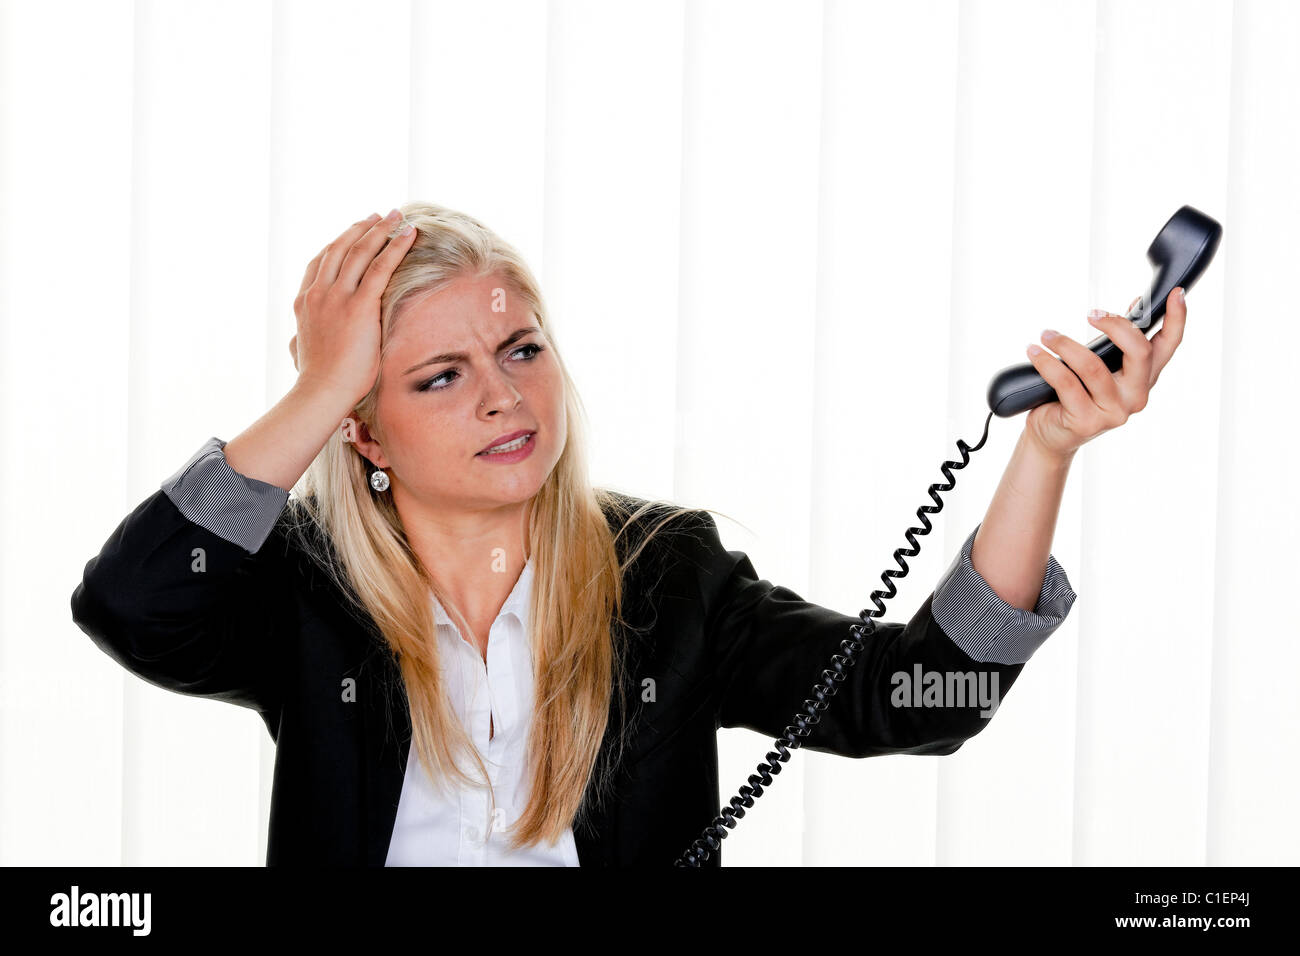 Young woman with problems and stress in the office Stock Photo